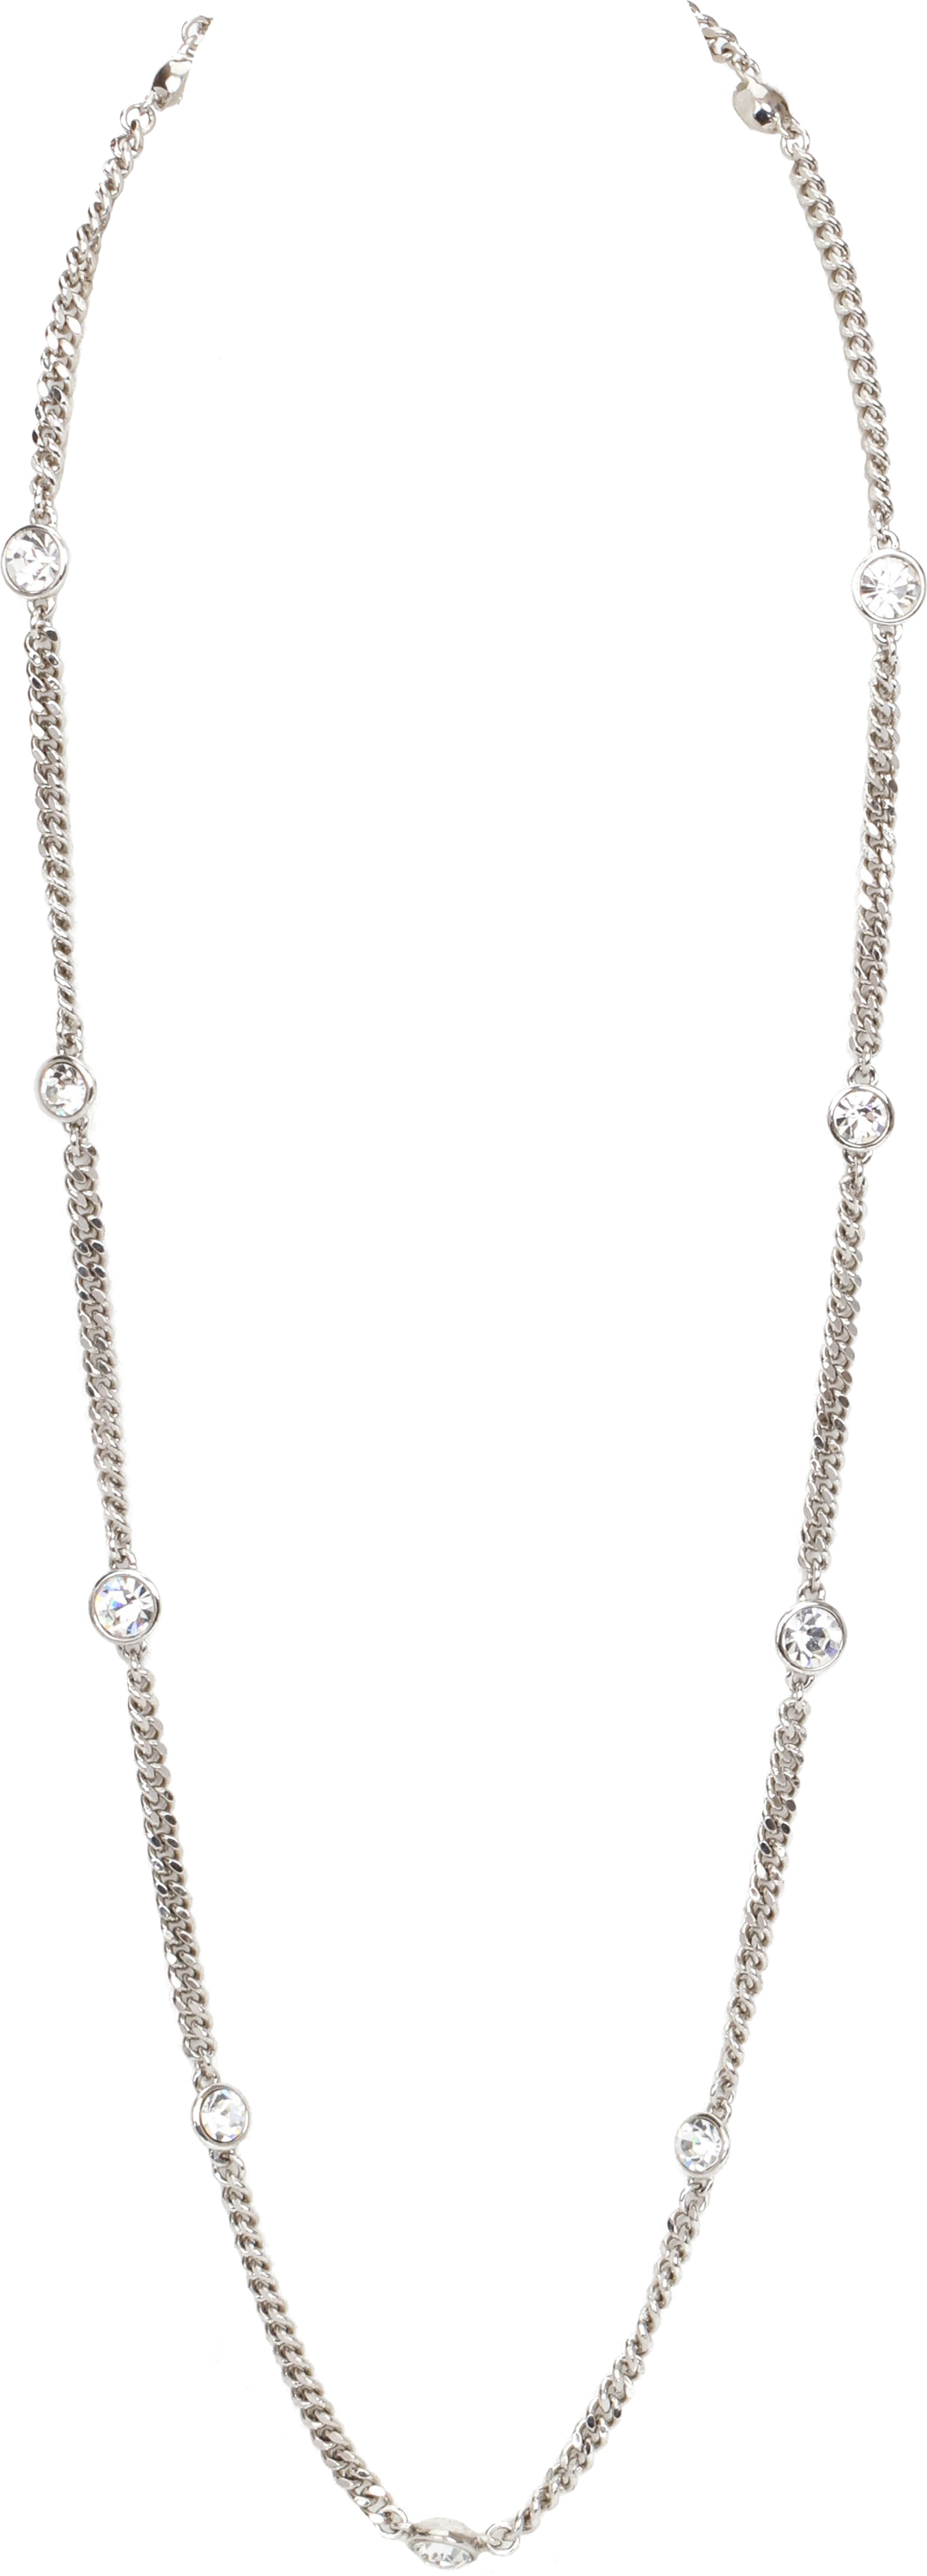 Givenchy chain necklace w/ round stones~P77633461